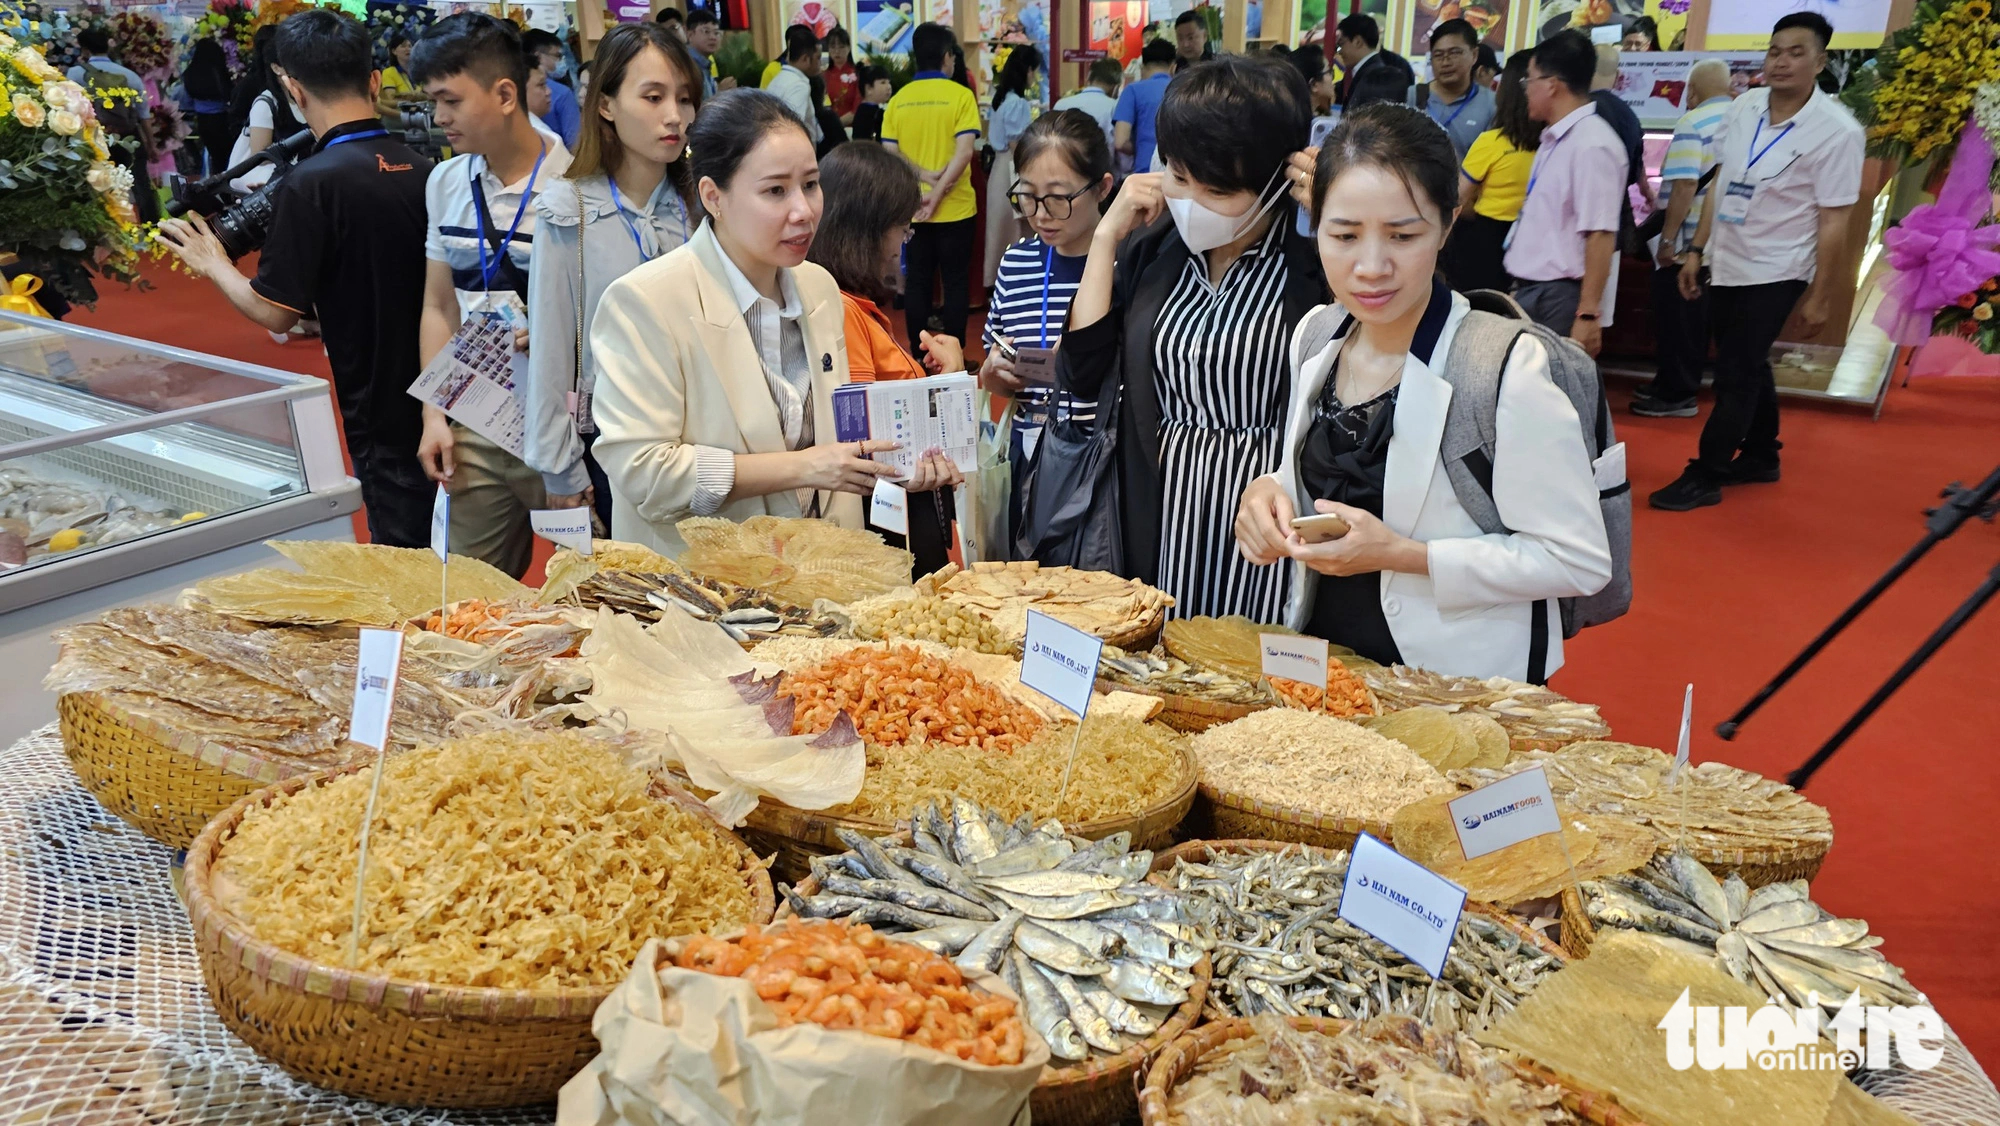 The trade show also features partly processed and refined seafood products, aside from fresh items. Photo: N. Tri / Tuoi Tre